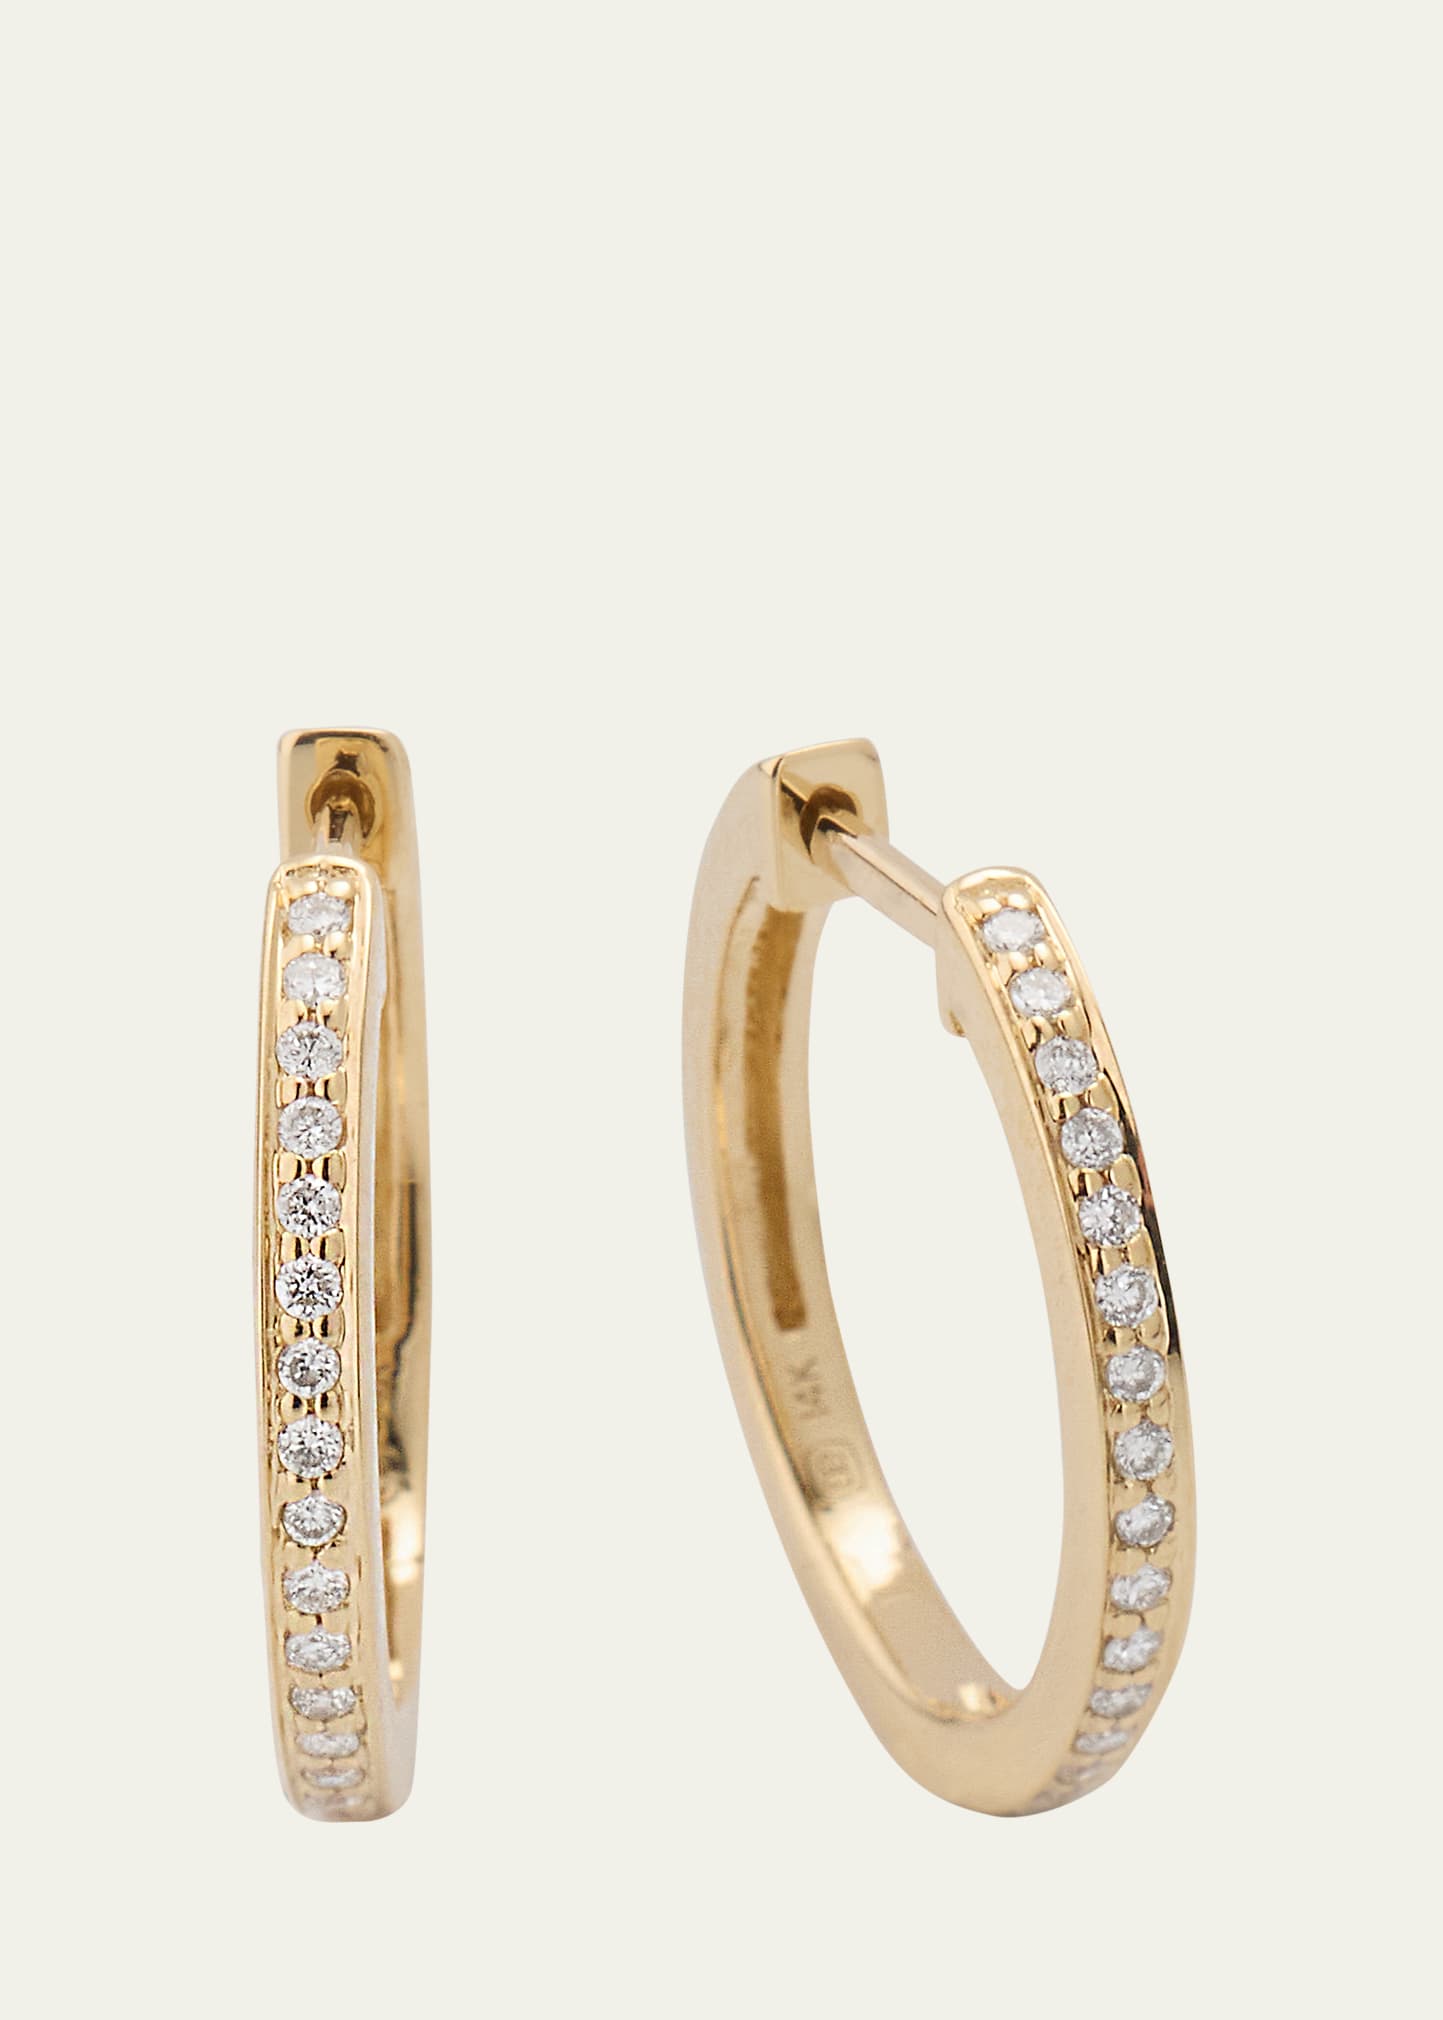 Sydney Evan 14k Yellow Gold 12mm Pave Huggie Earrings With Diamonds